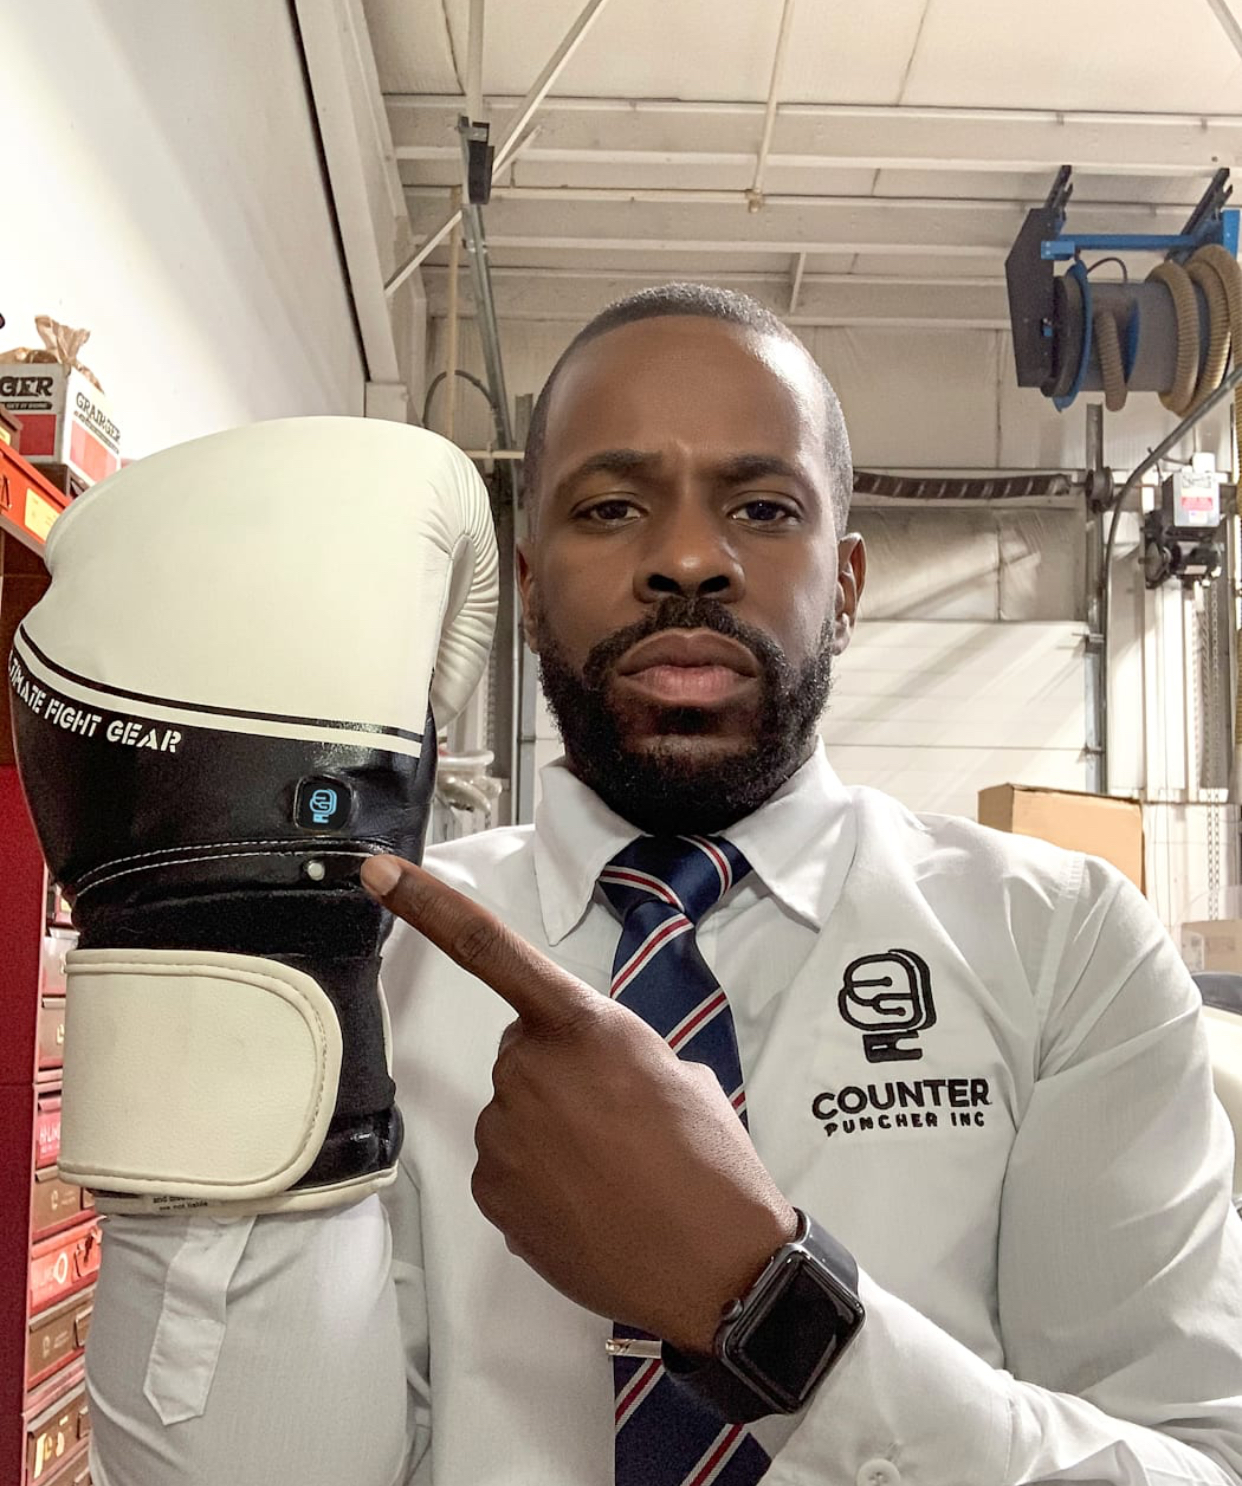 Counter Puncher Inc.’s Handcrafted Smart OLED Display Screen Boxing Gloves Set to Release in 2022